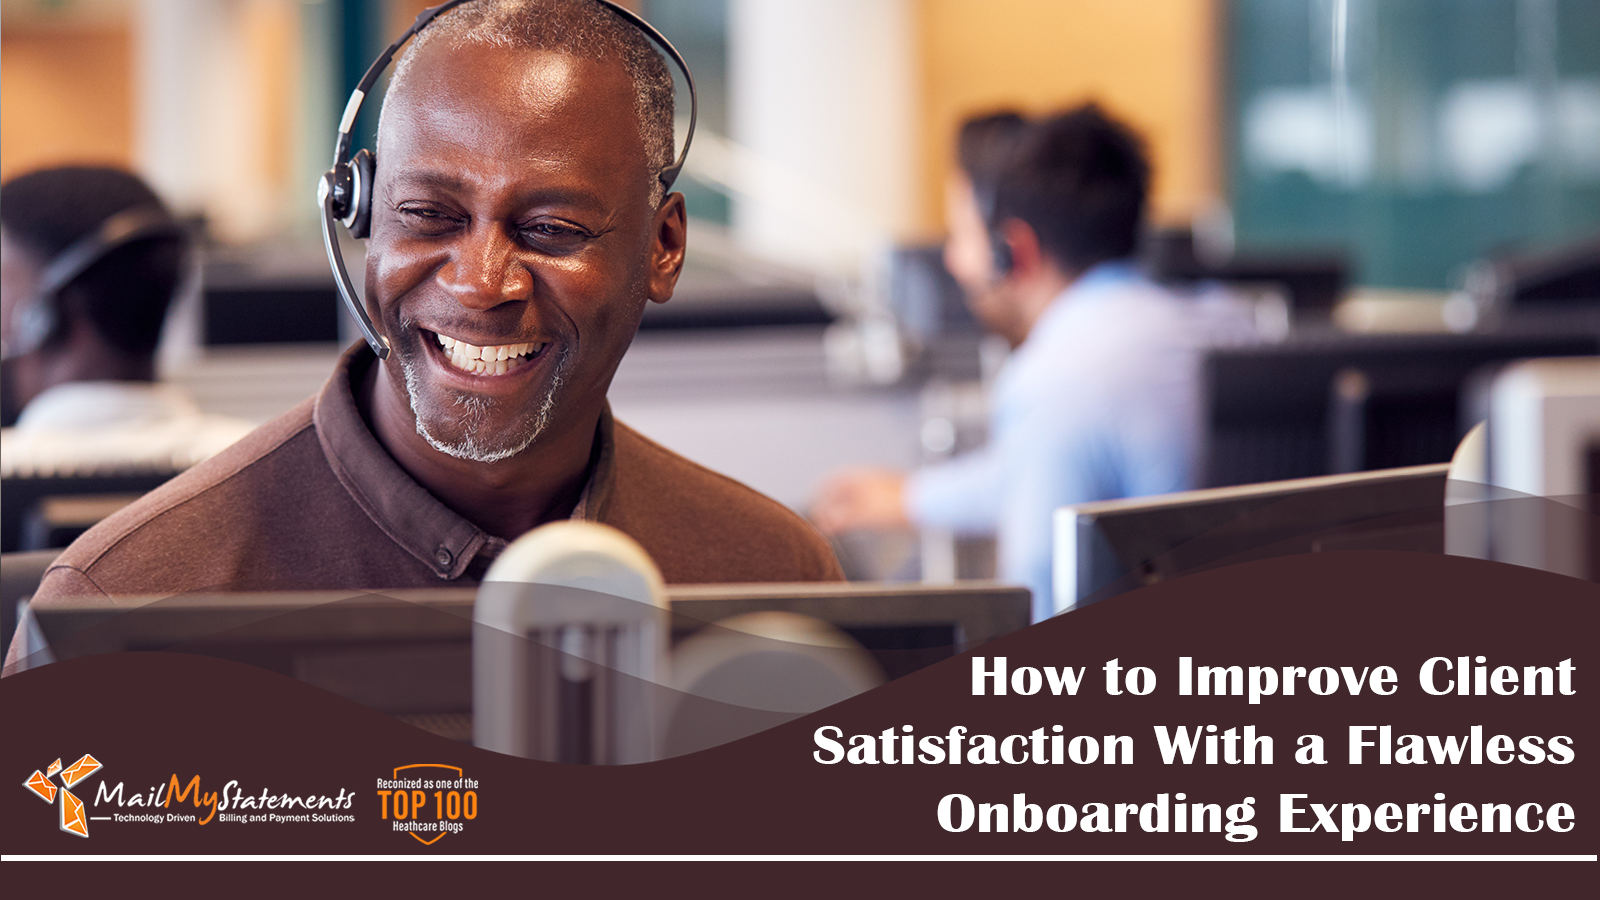 How to Improve Client Satisfaction With a Flawless Onboarding Experience